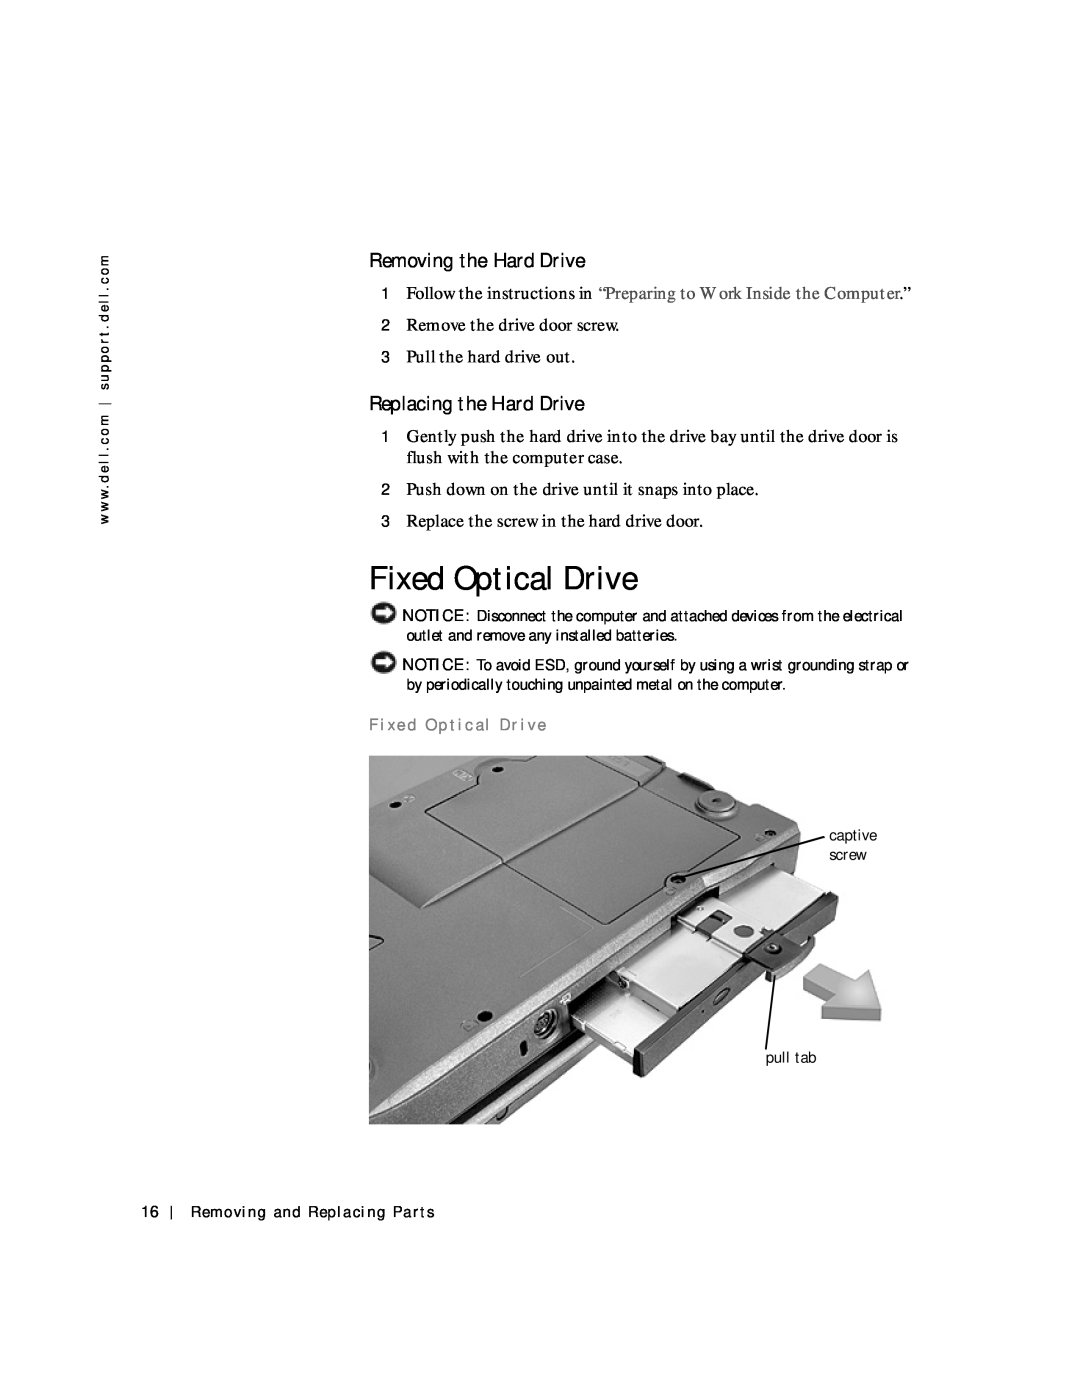 Applied Energy Products C800 service manual Fixed Optical Drive, Removing the Hard Drive, Replacing the Hard Drive 